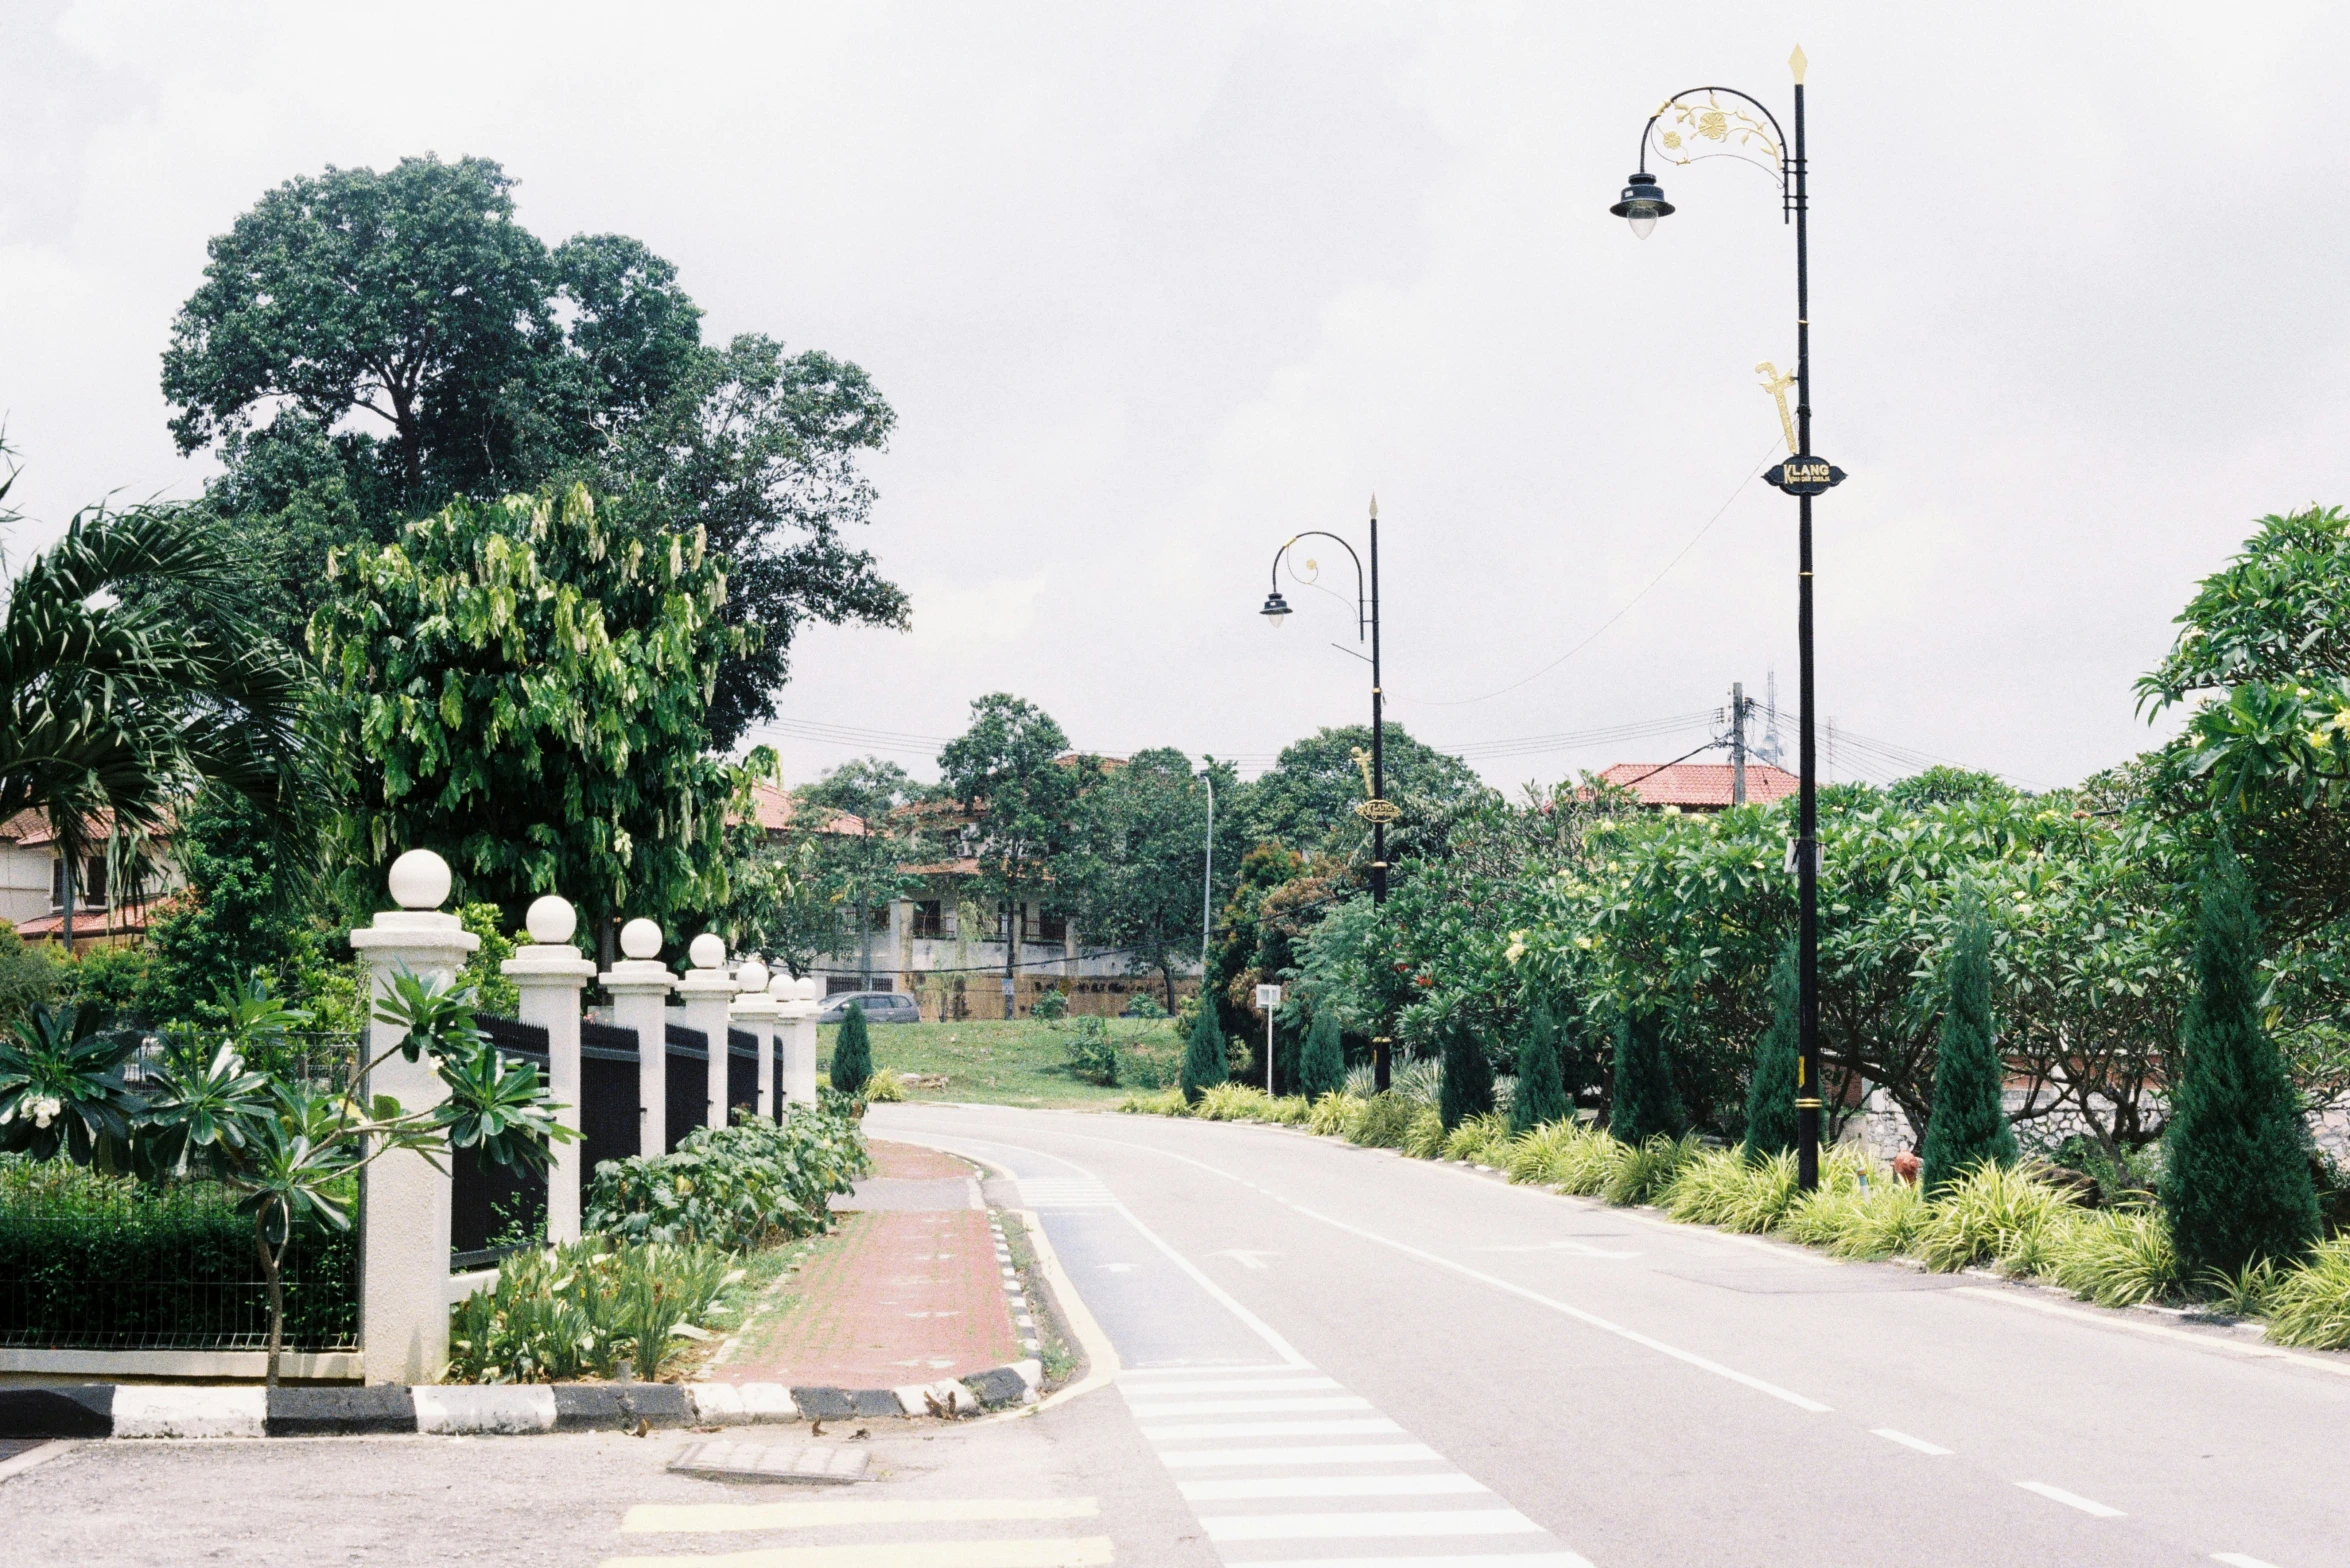 a view of an empty street, with some trees in the background